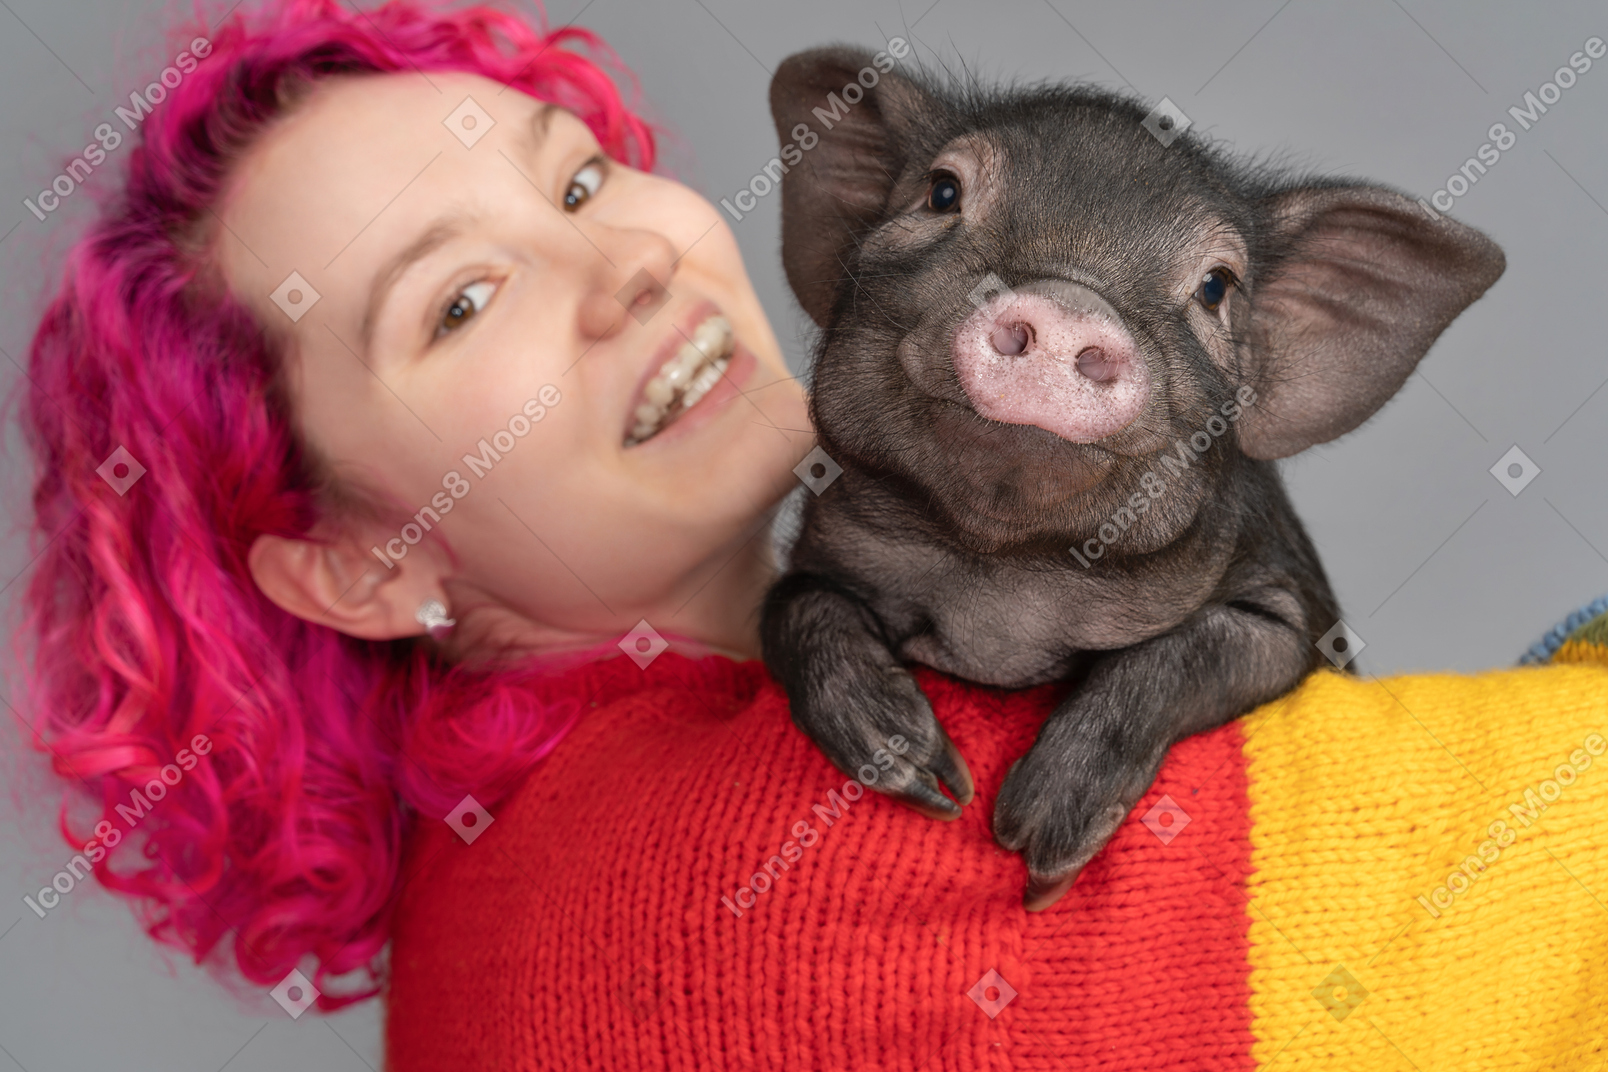 Pink haired female holding a little piglet